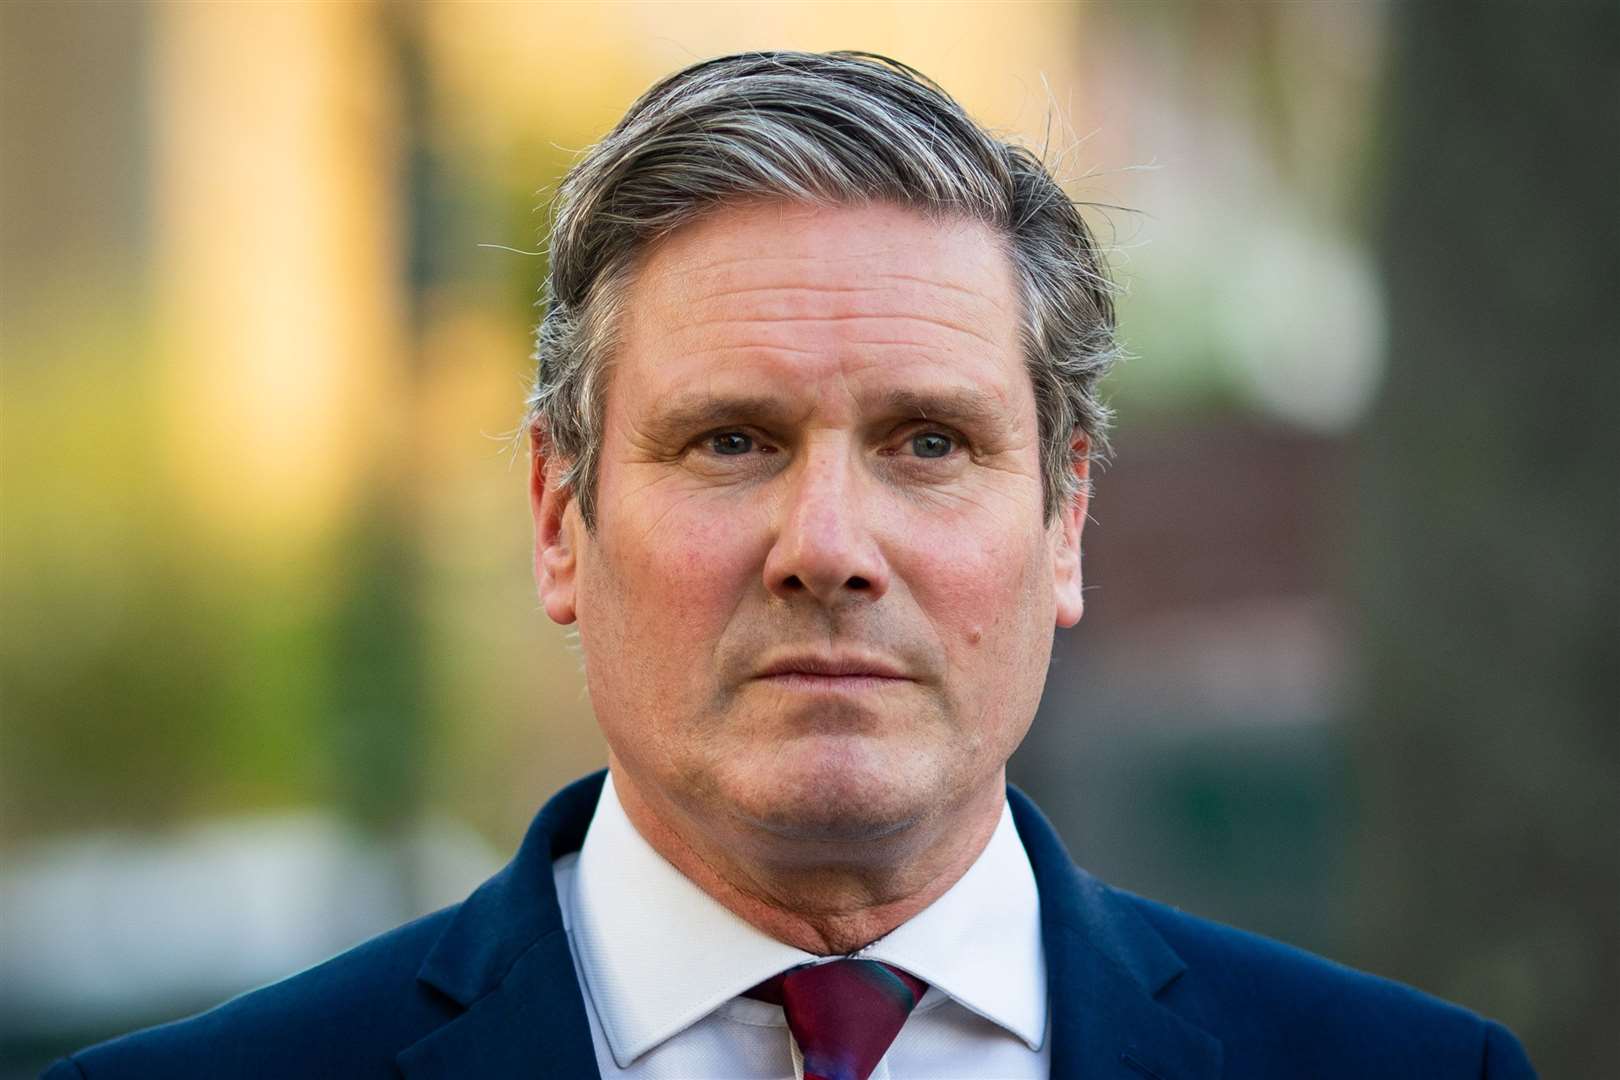 Sir Keir Starmer who has put nurses' pay at the forefront of Labour's local election campaigning